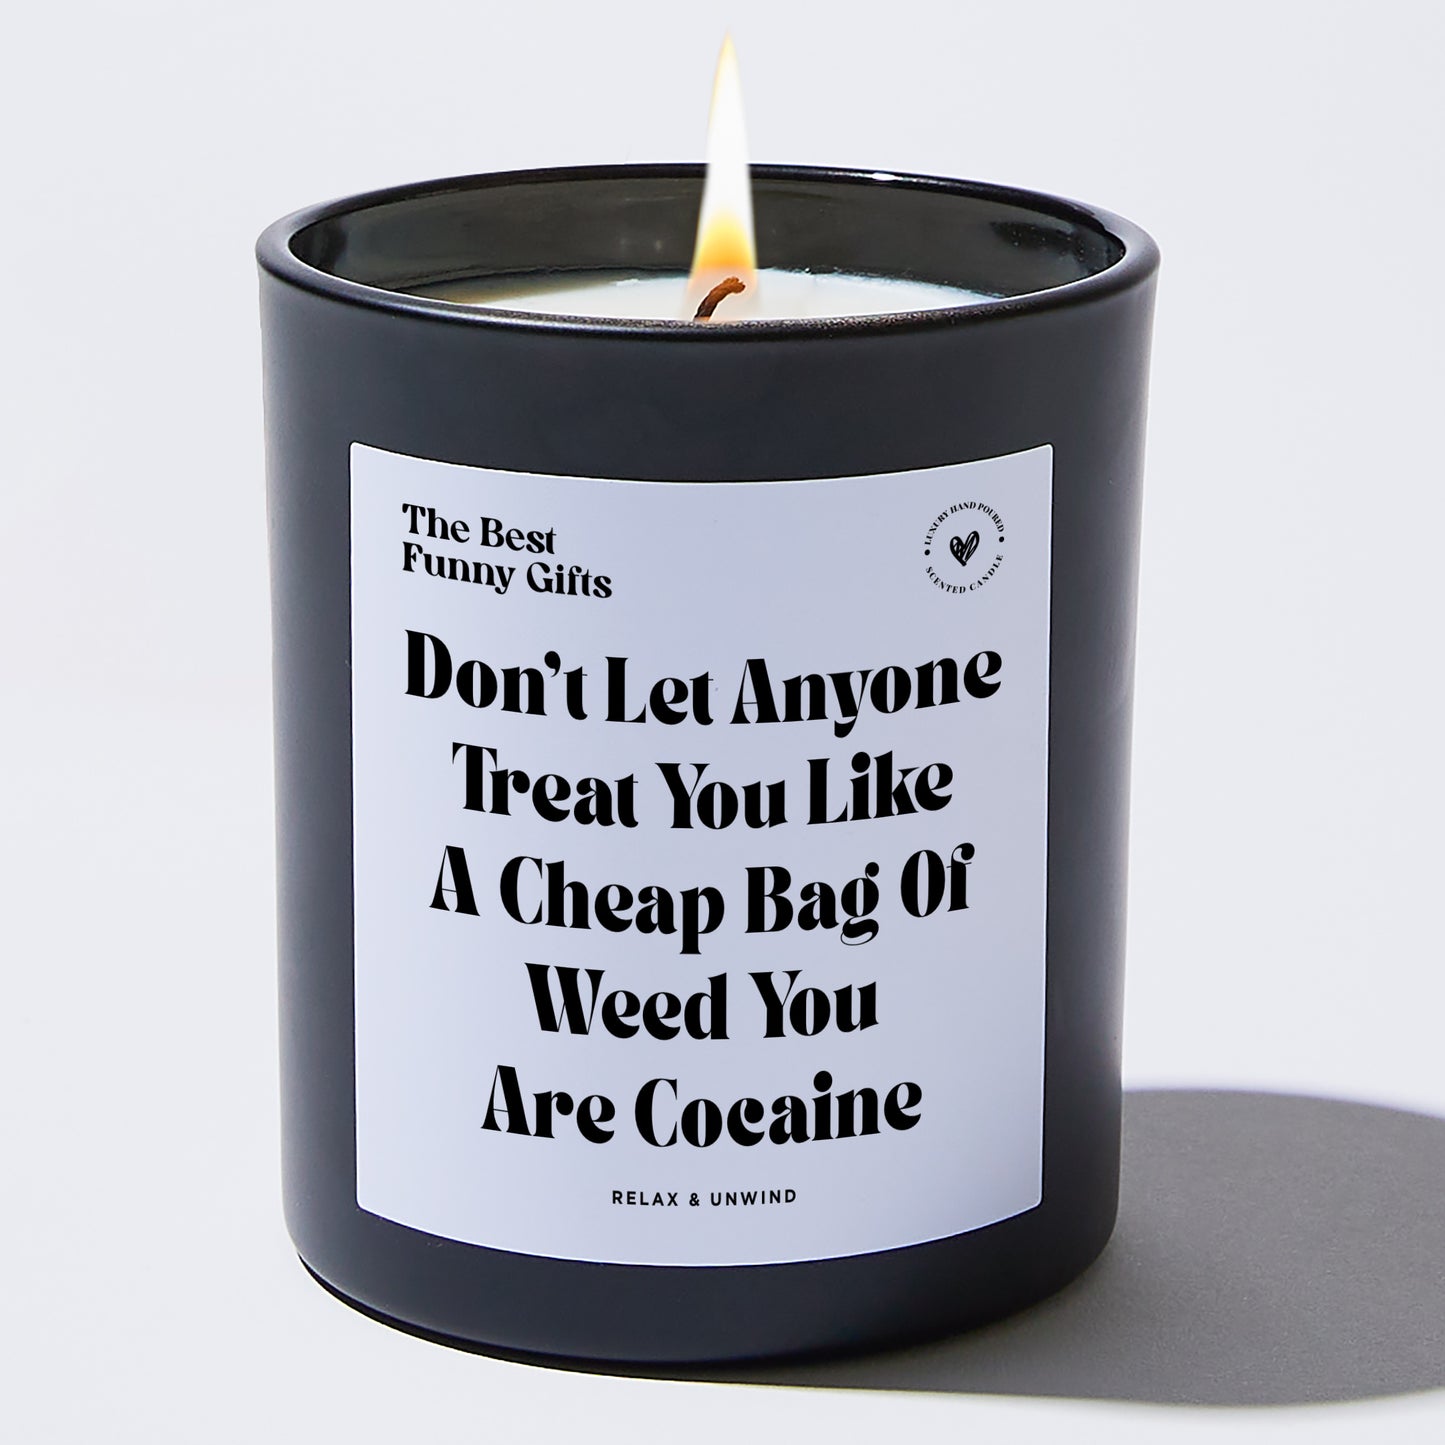 Funny Candle Don't Let Anyone Treat You Like A Cheap Bag Of Weed You Are Cocaine - The Best Funny Gifts